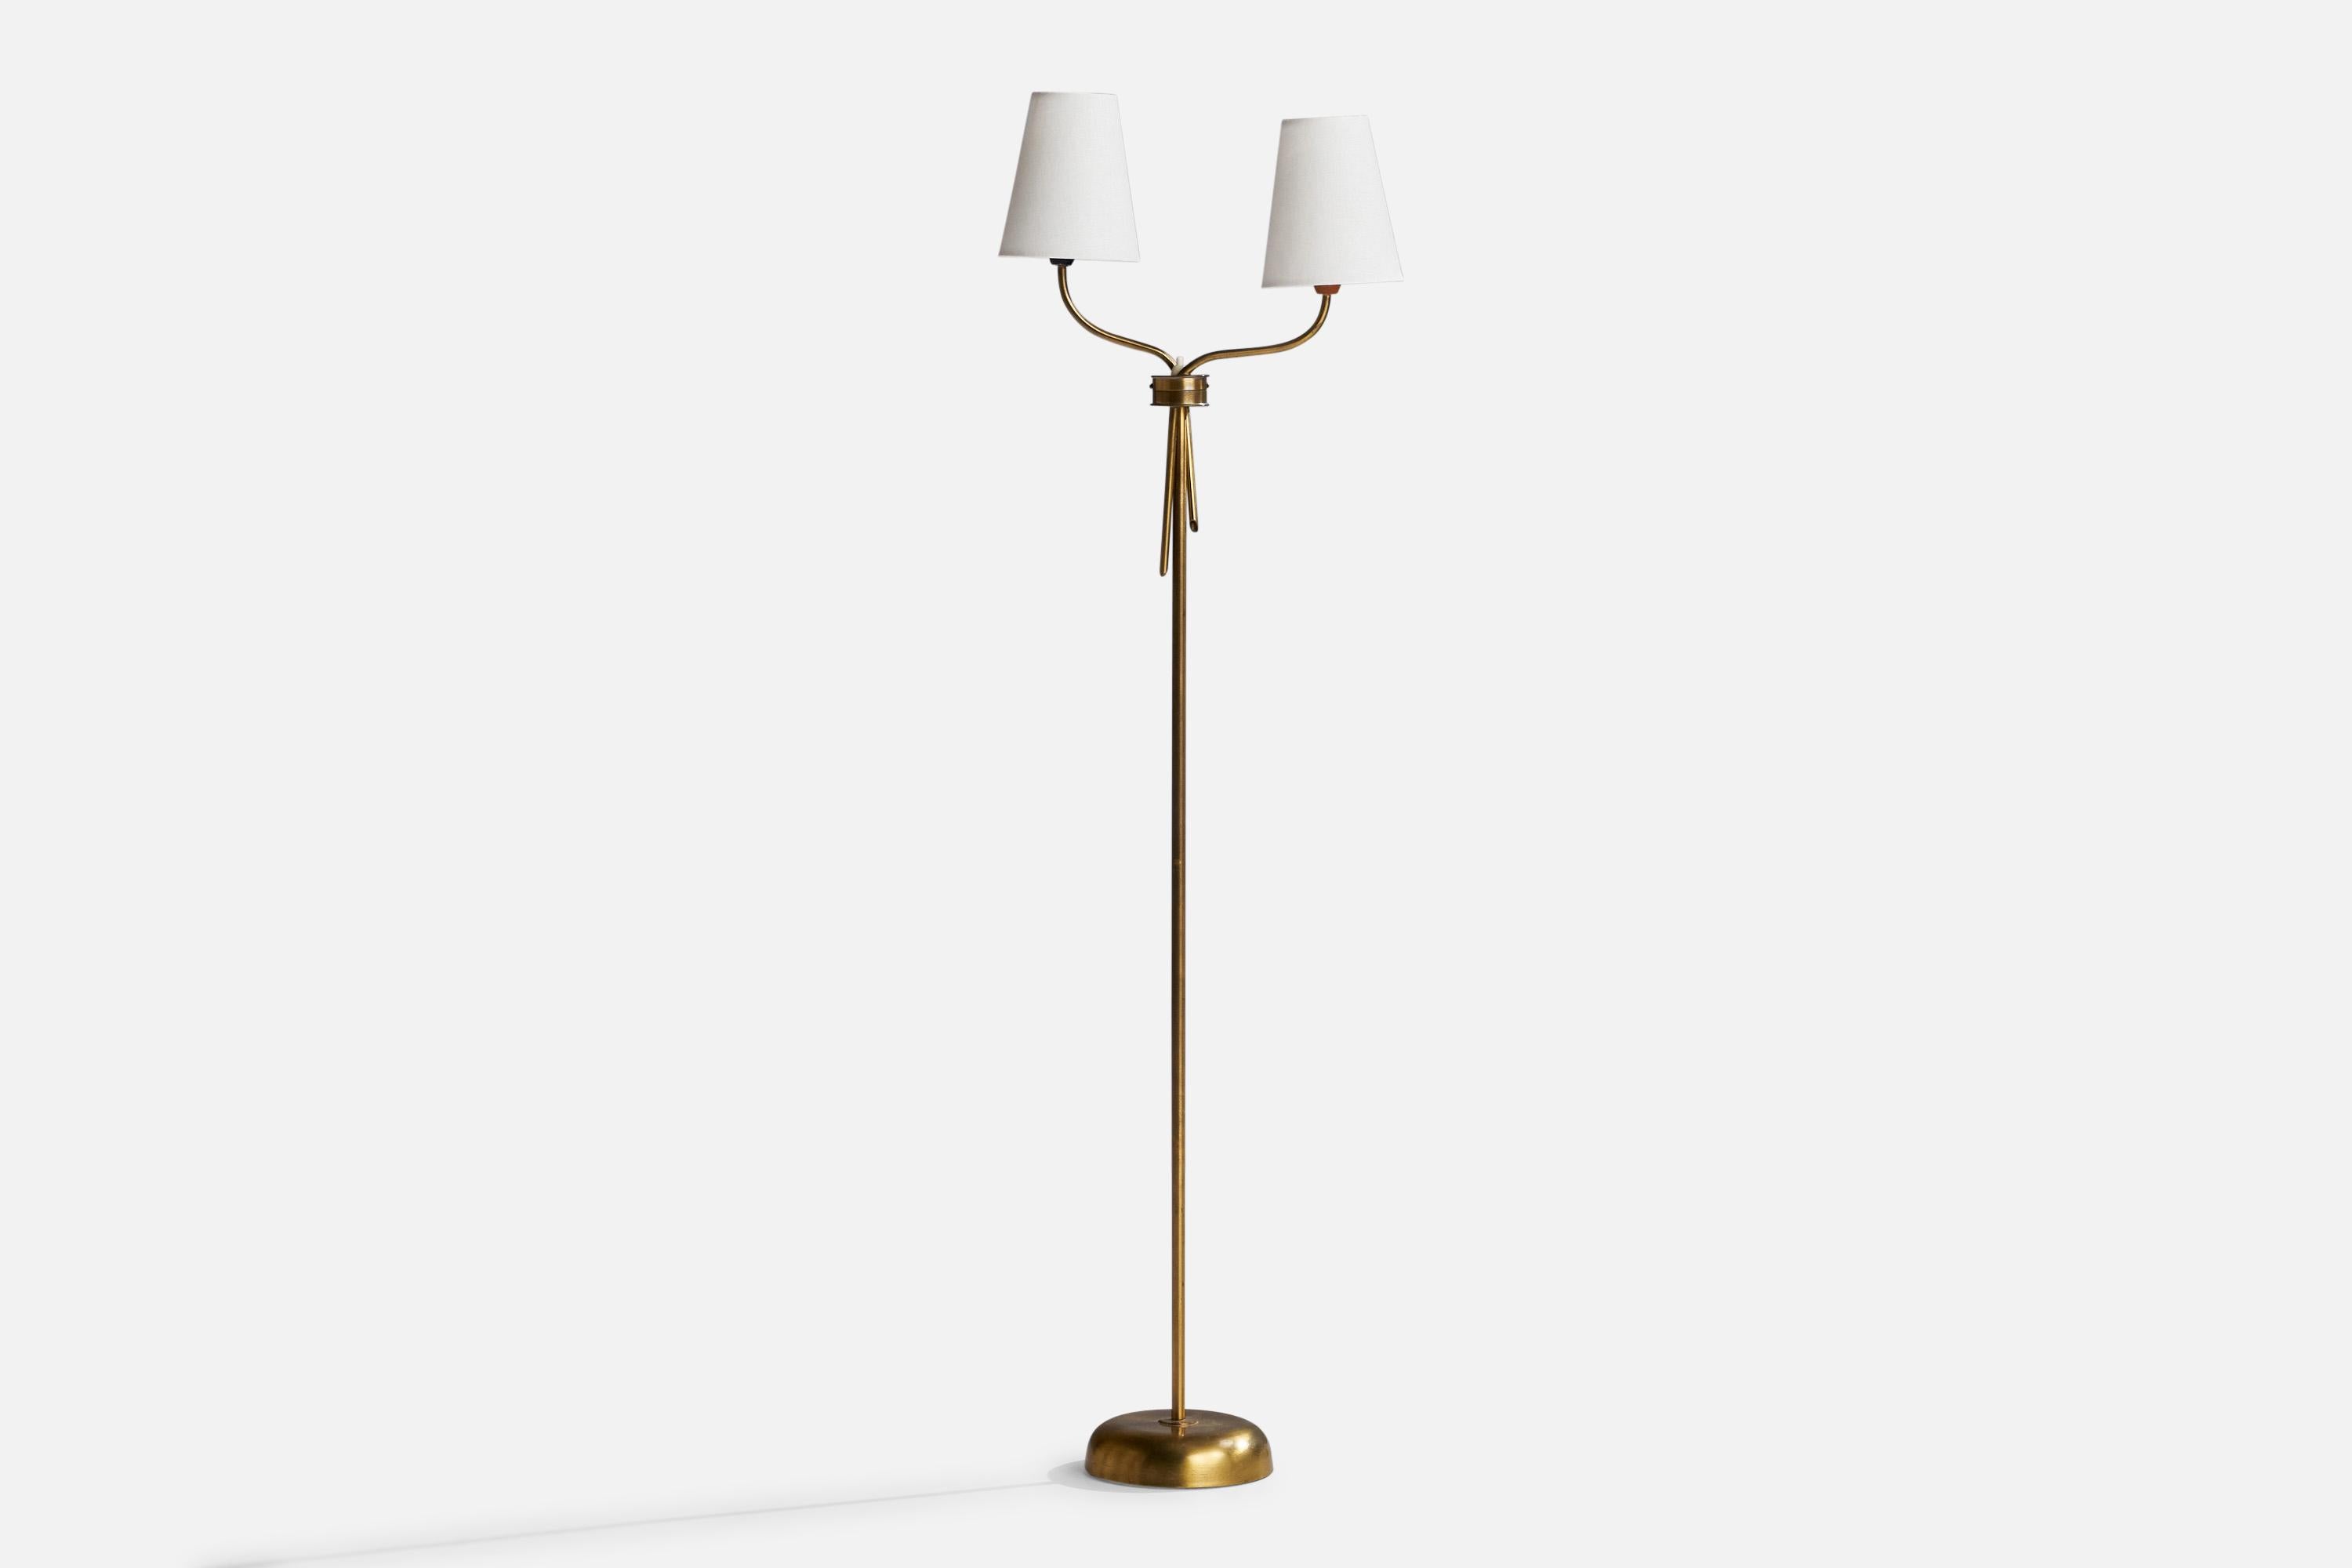 A two-armed brass and white fabric floor lamp designed and produced in Sweden, 1940s.

Dimensions of Lamp (inches): 47”  H x 6.5” Diameter
Dimensions of Shade (inches): 3” Top Diameter x 5” Bottom Diameter x 6” H
Dimensions of Lamp with Shade